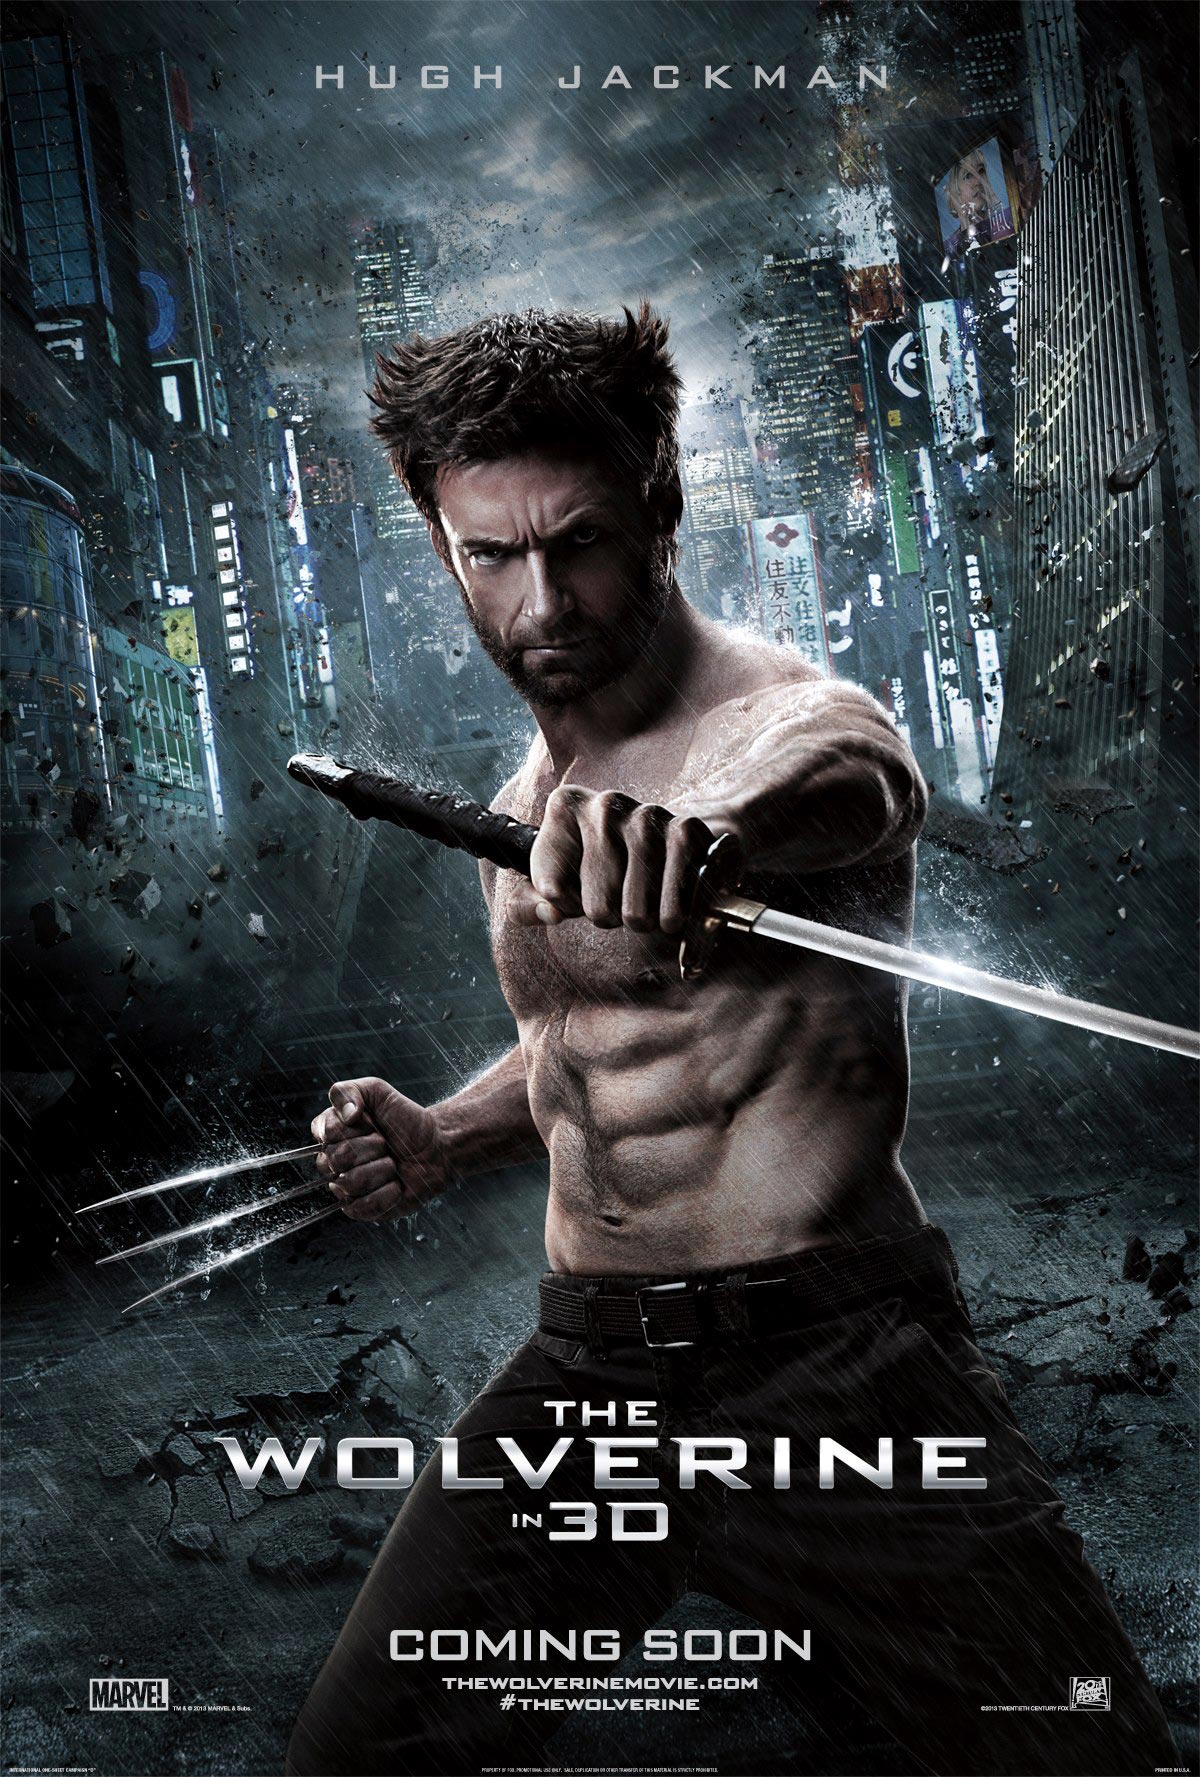 Back to The Wolverine , can you tell us a bit about your character or